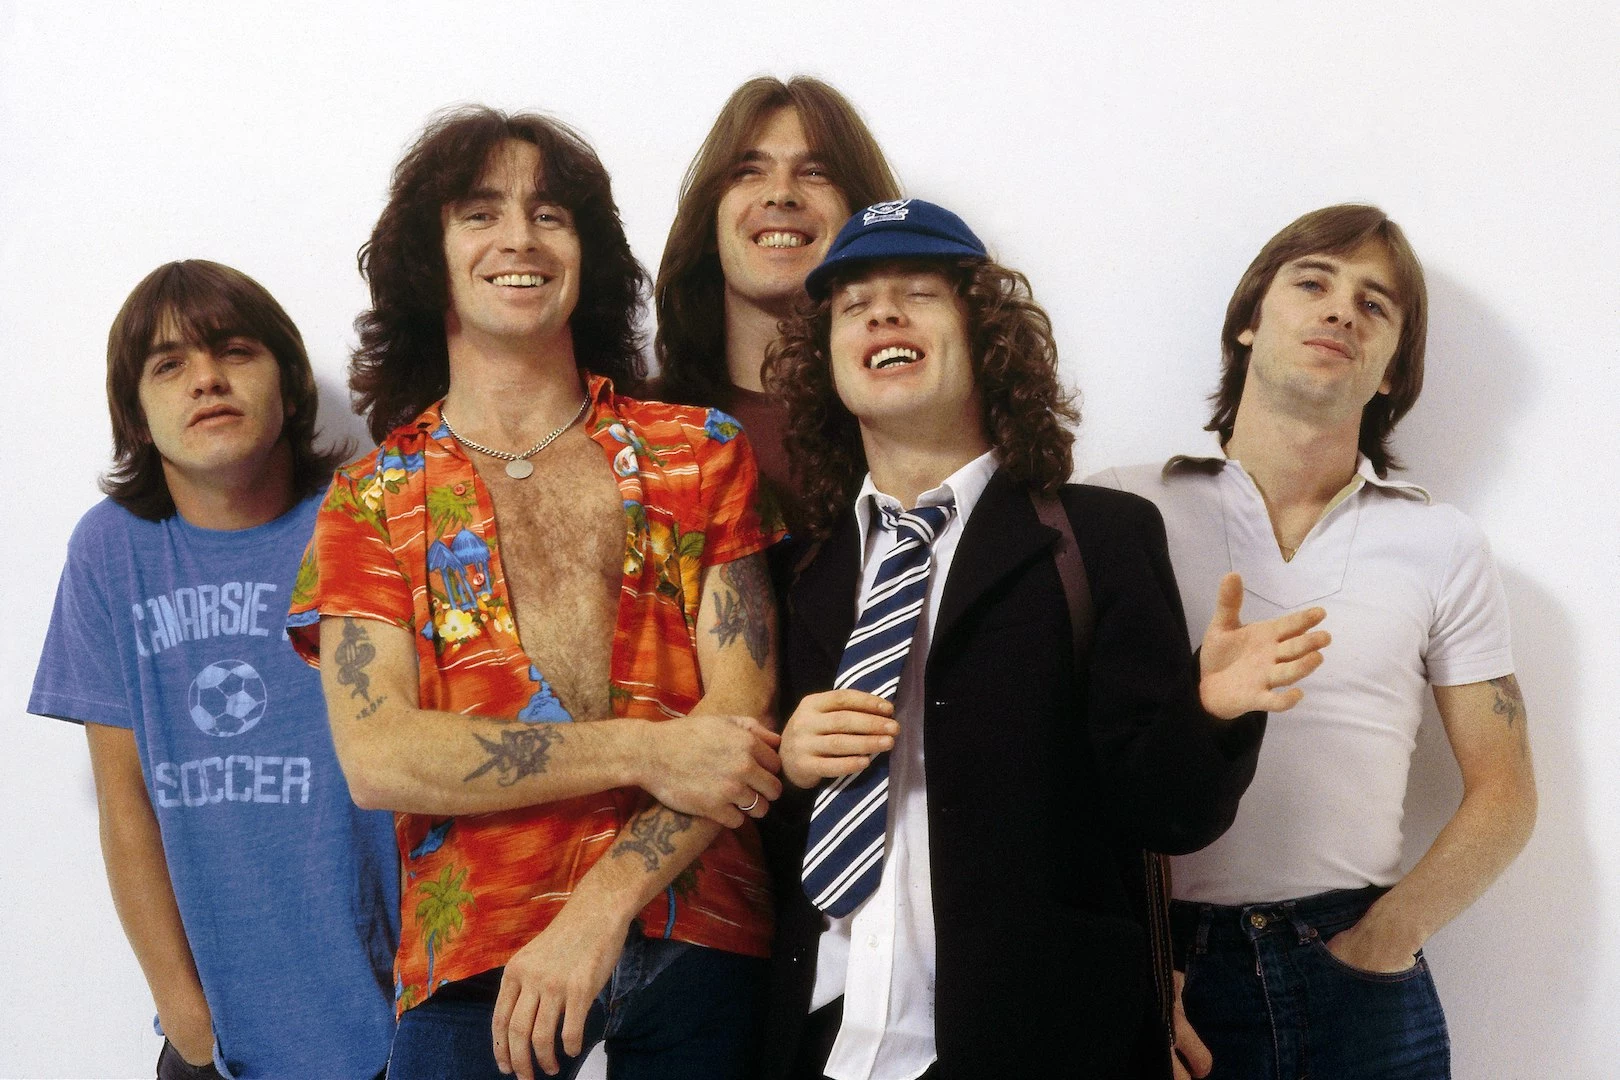 Poll: What's the Best AC/DC Album? - Vote Now